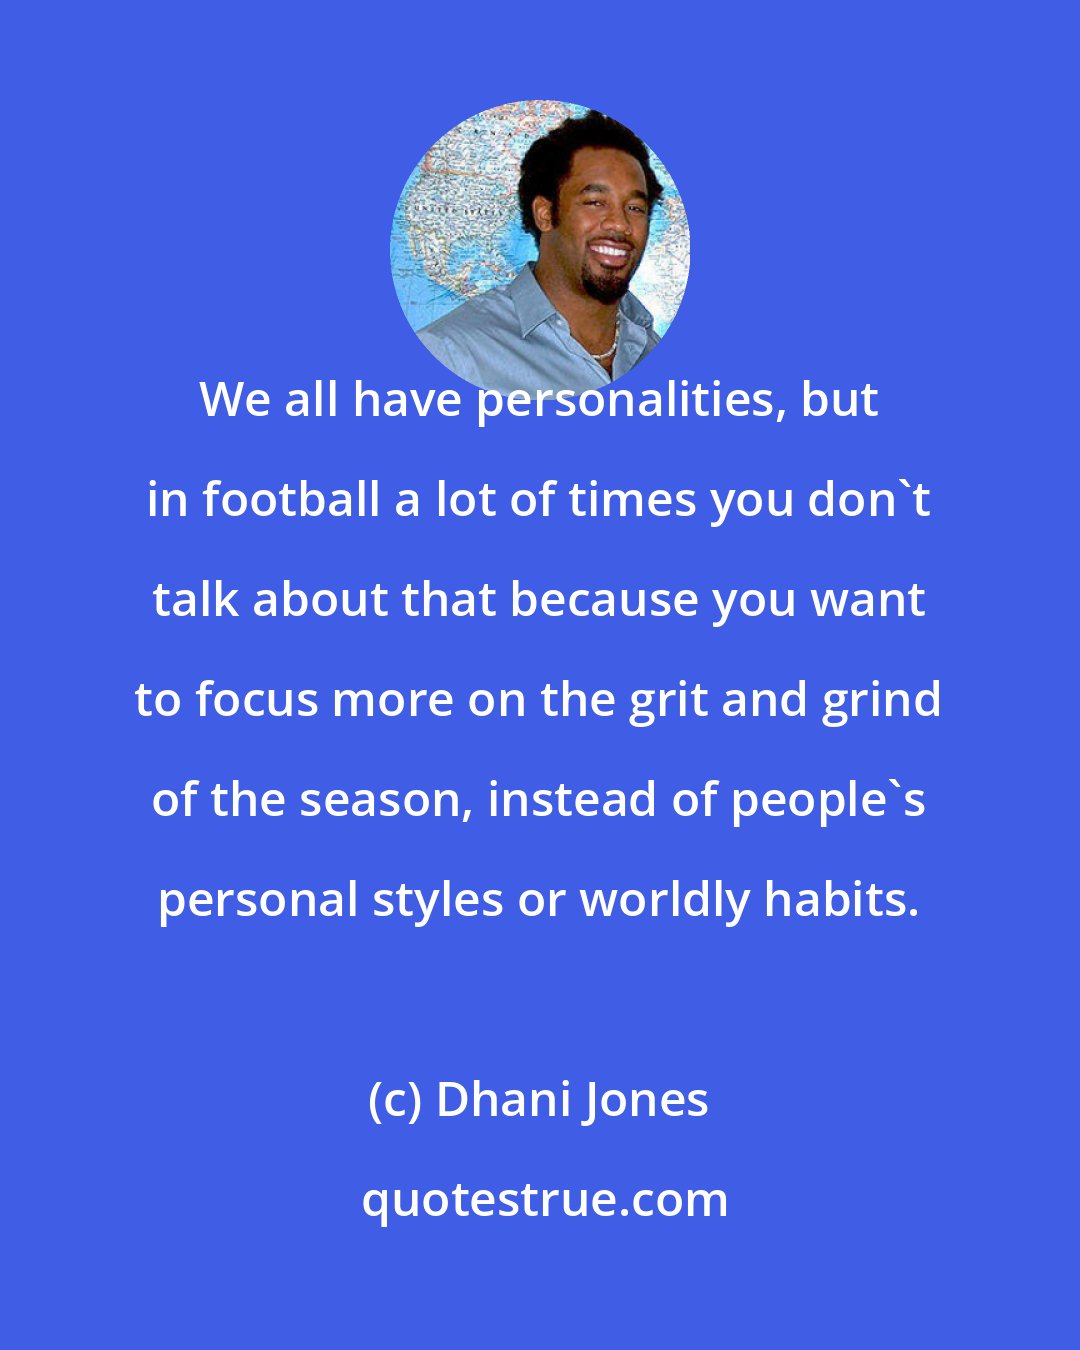 Dhani Jones: We all have personalities, but in football a lot of times you don't talk about that because you want to focus more on the grit and grind of the season, instead of people's personal styles or worldly habits.